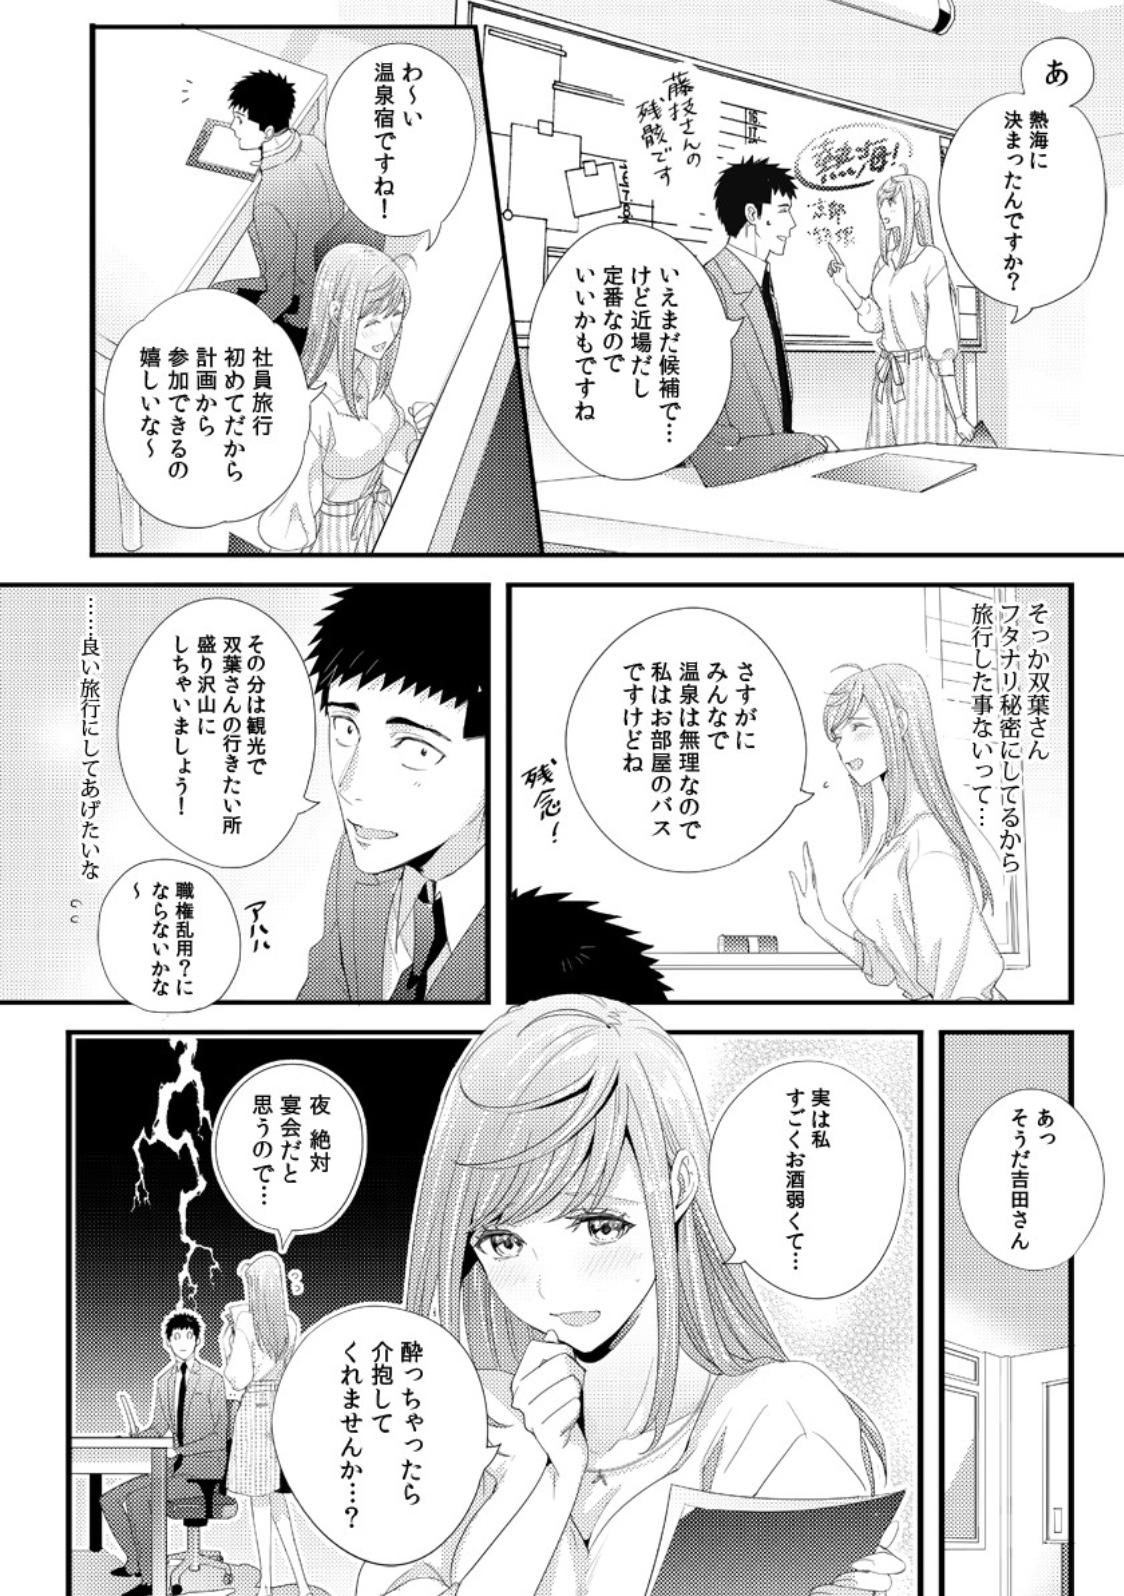 Please Let Me Hold You Futaba-San! Ch. 1+2 5